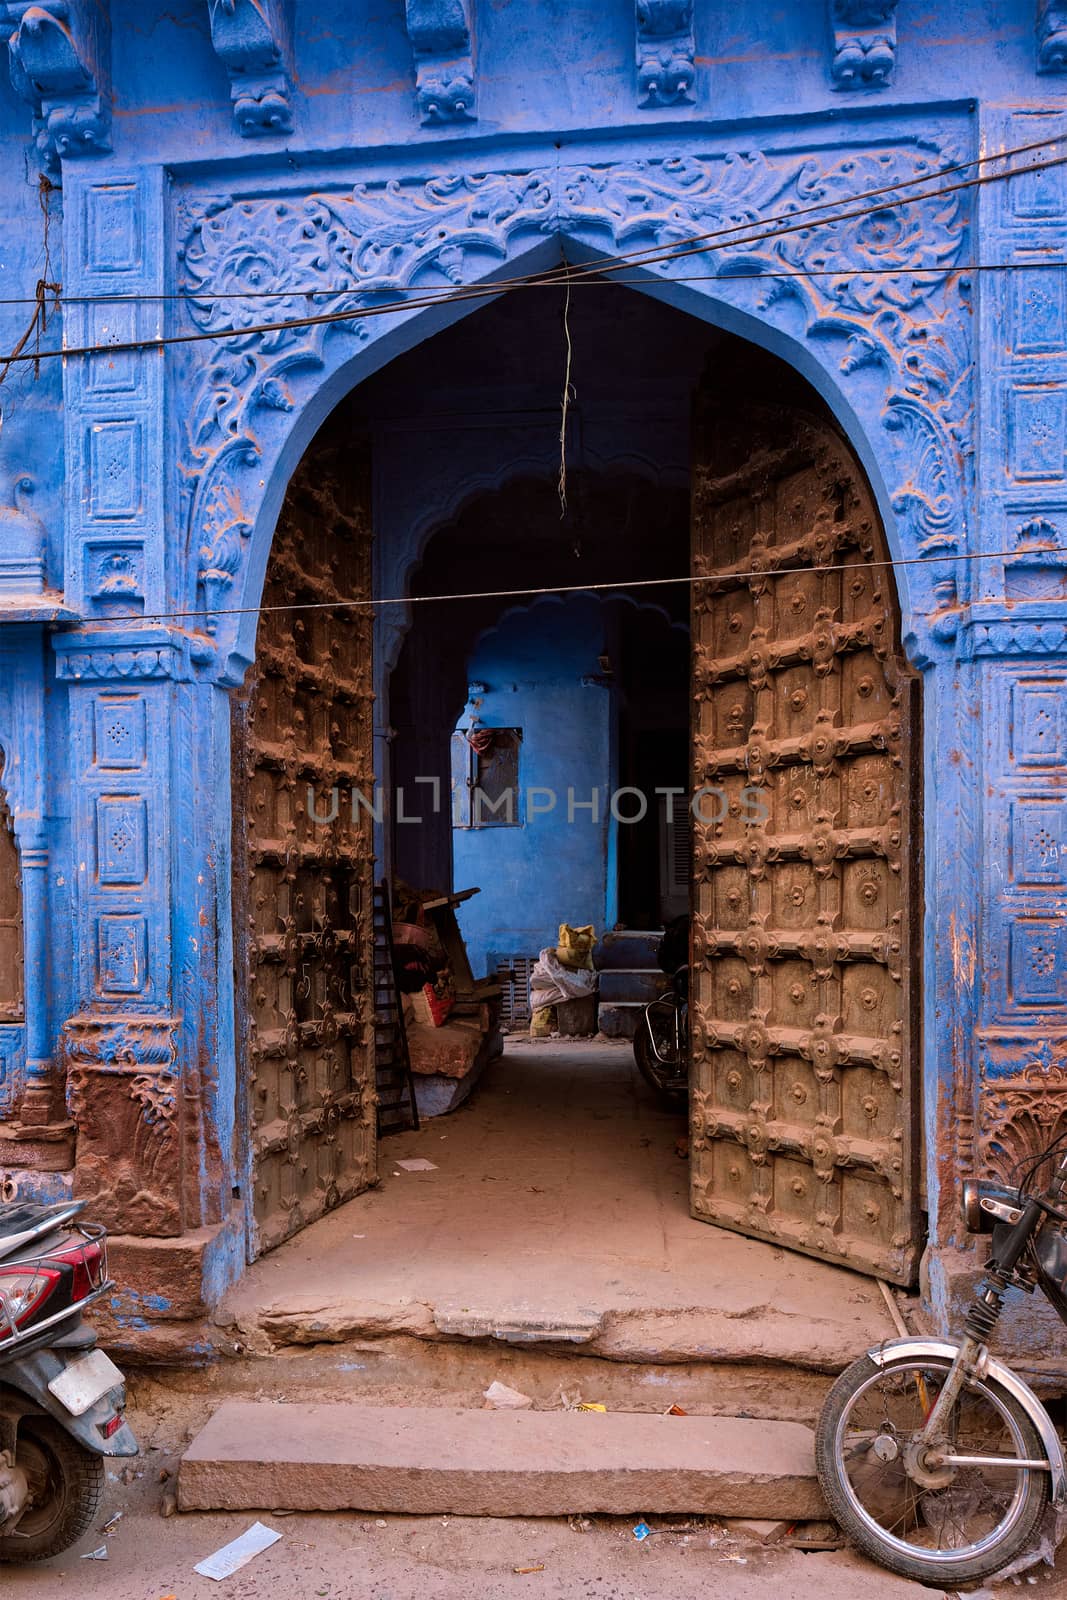 Blue house facade in streets of of Jodhpur, also known as "Blue City" due to the vivid blue-painted Brahmin houses, Jodhpur, Rajasthan, India